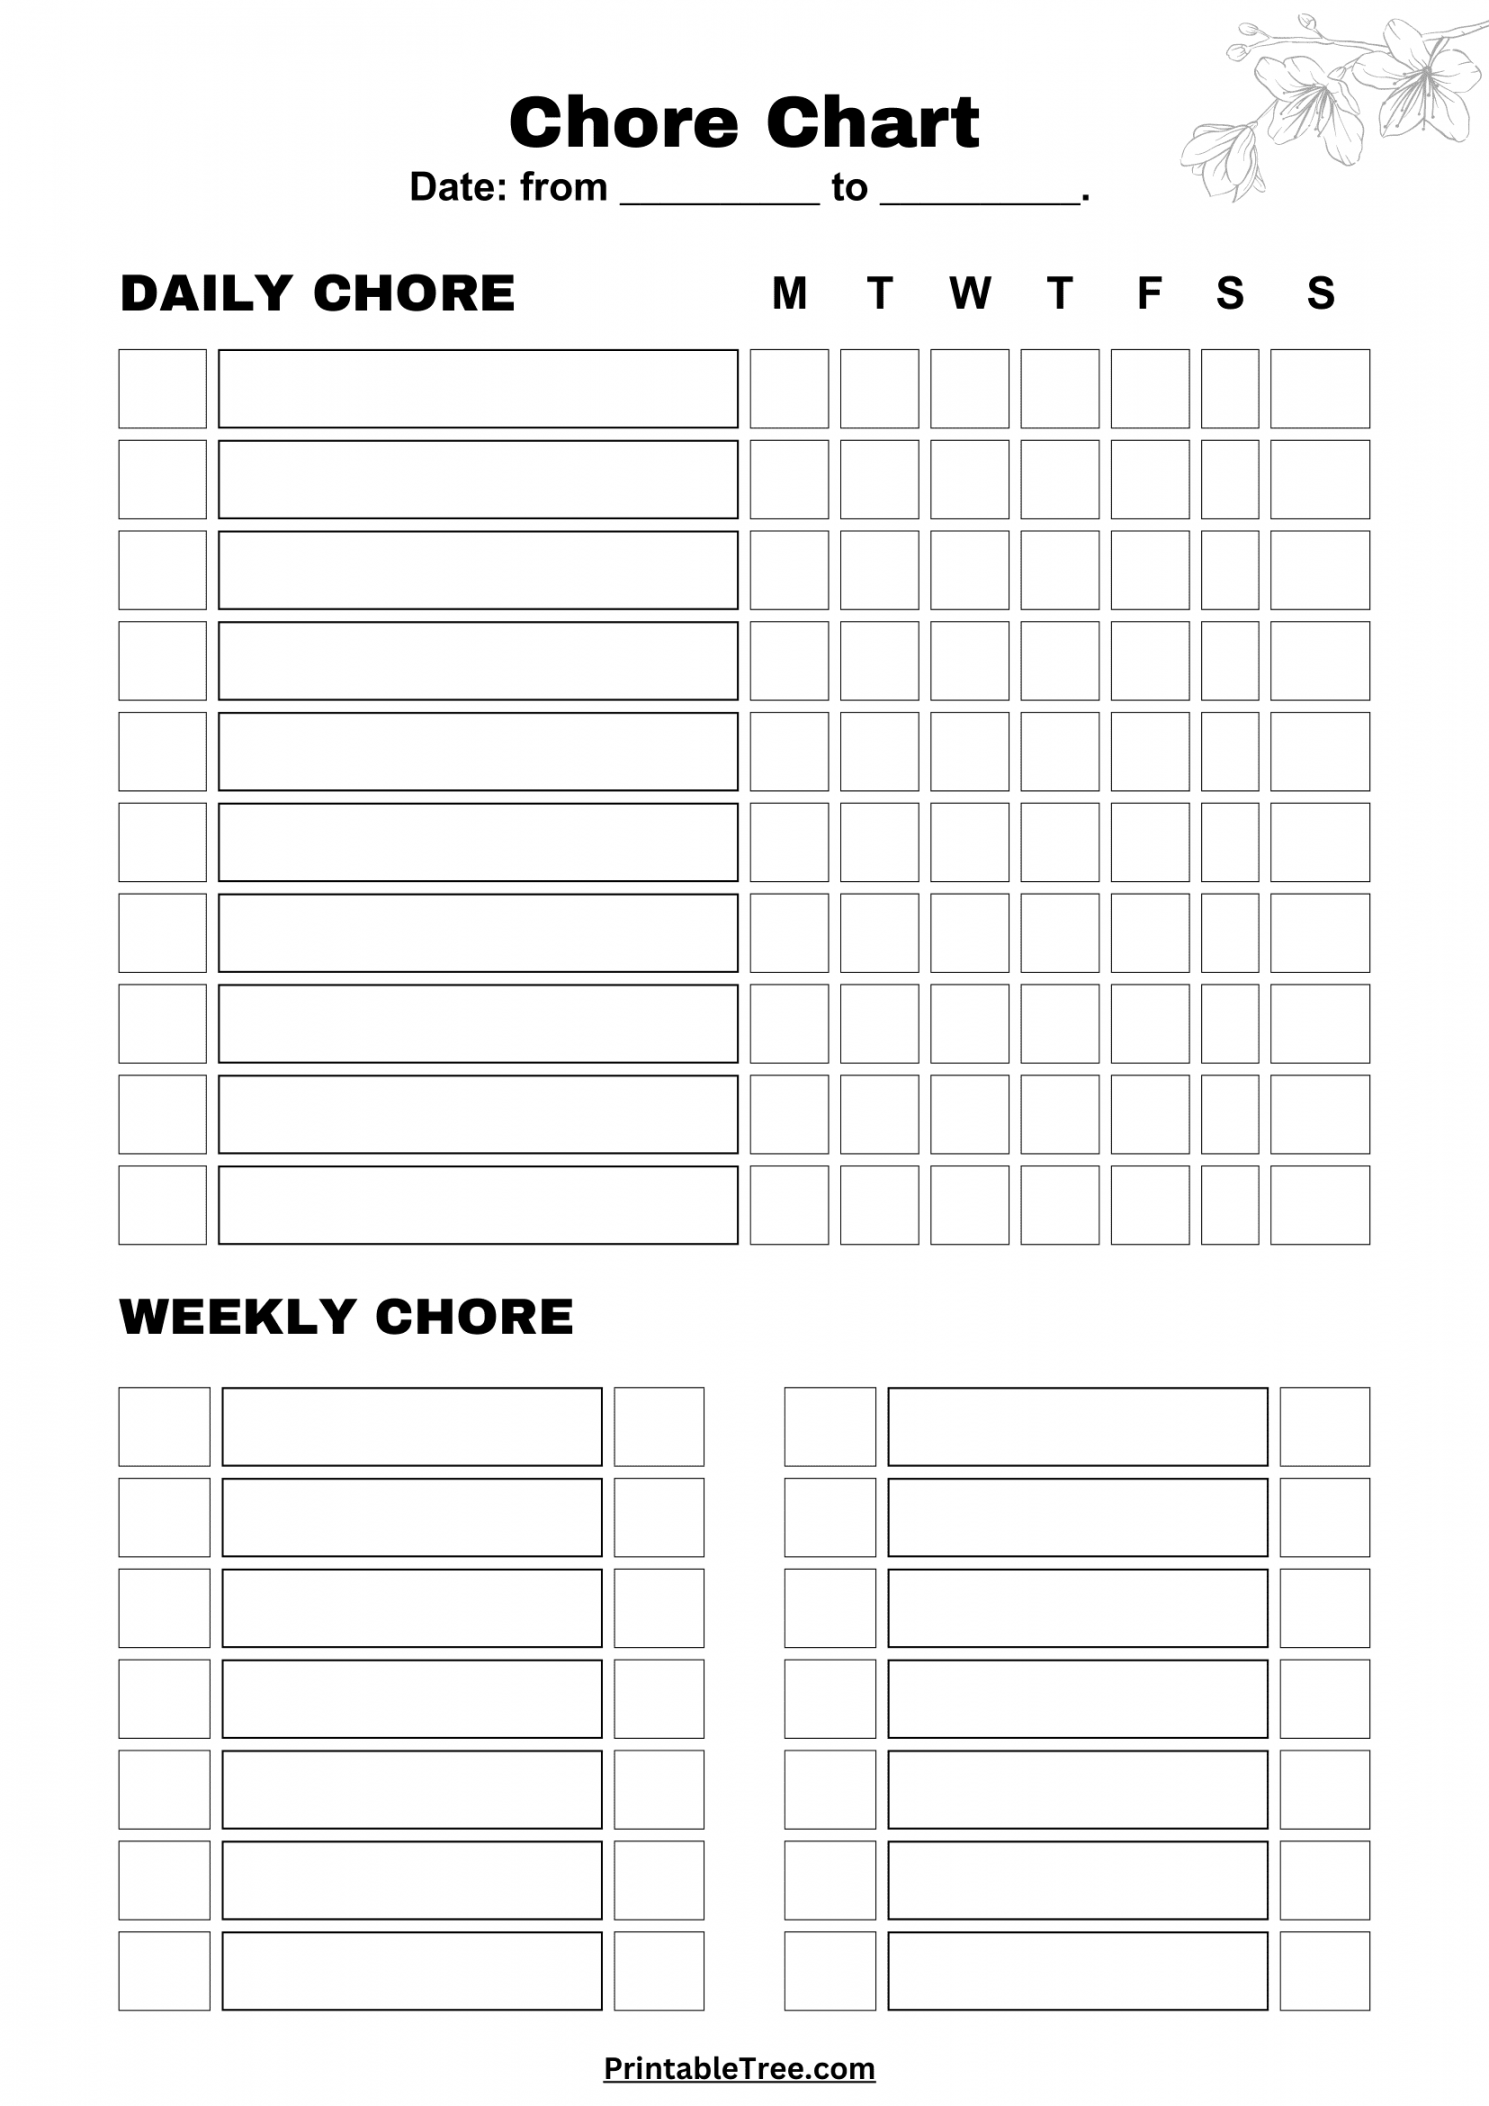 Free Printable Chore Chart PDF Template for Kids - FREE Printables - Pdf Free Printable Chore Charts